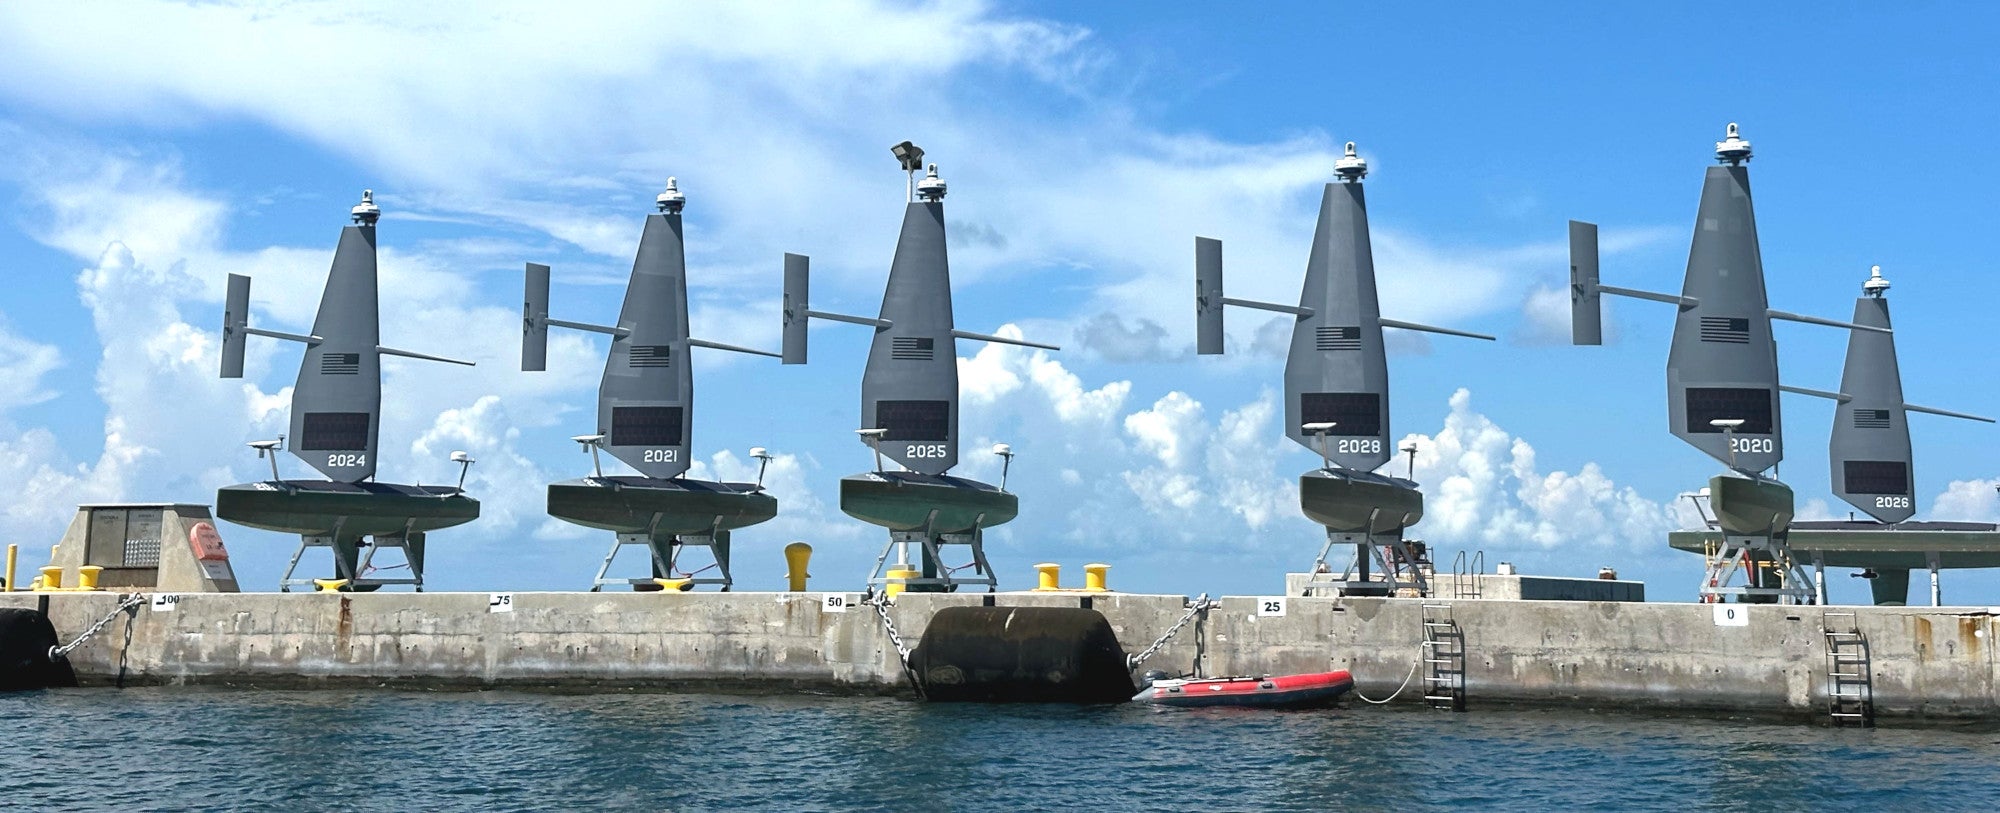 Drone Boat Swarm Vision Laid Out By DoD